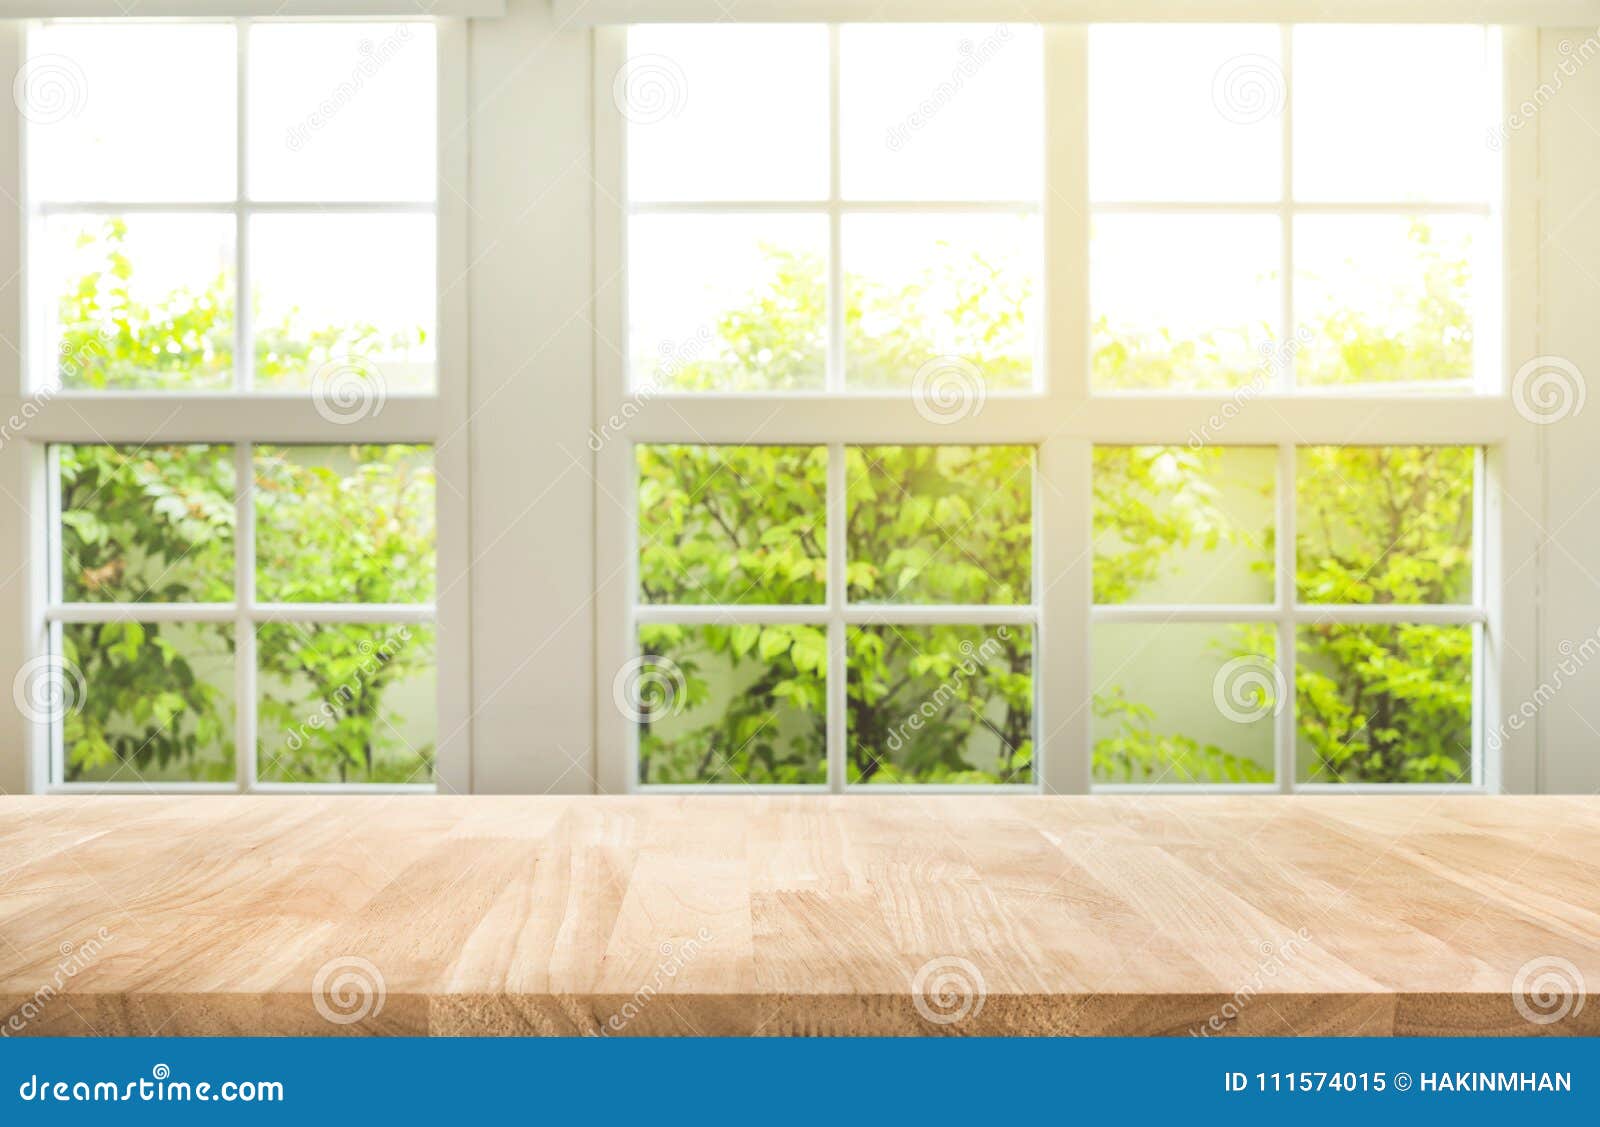 top of wood table counter on blur window view garden background.